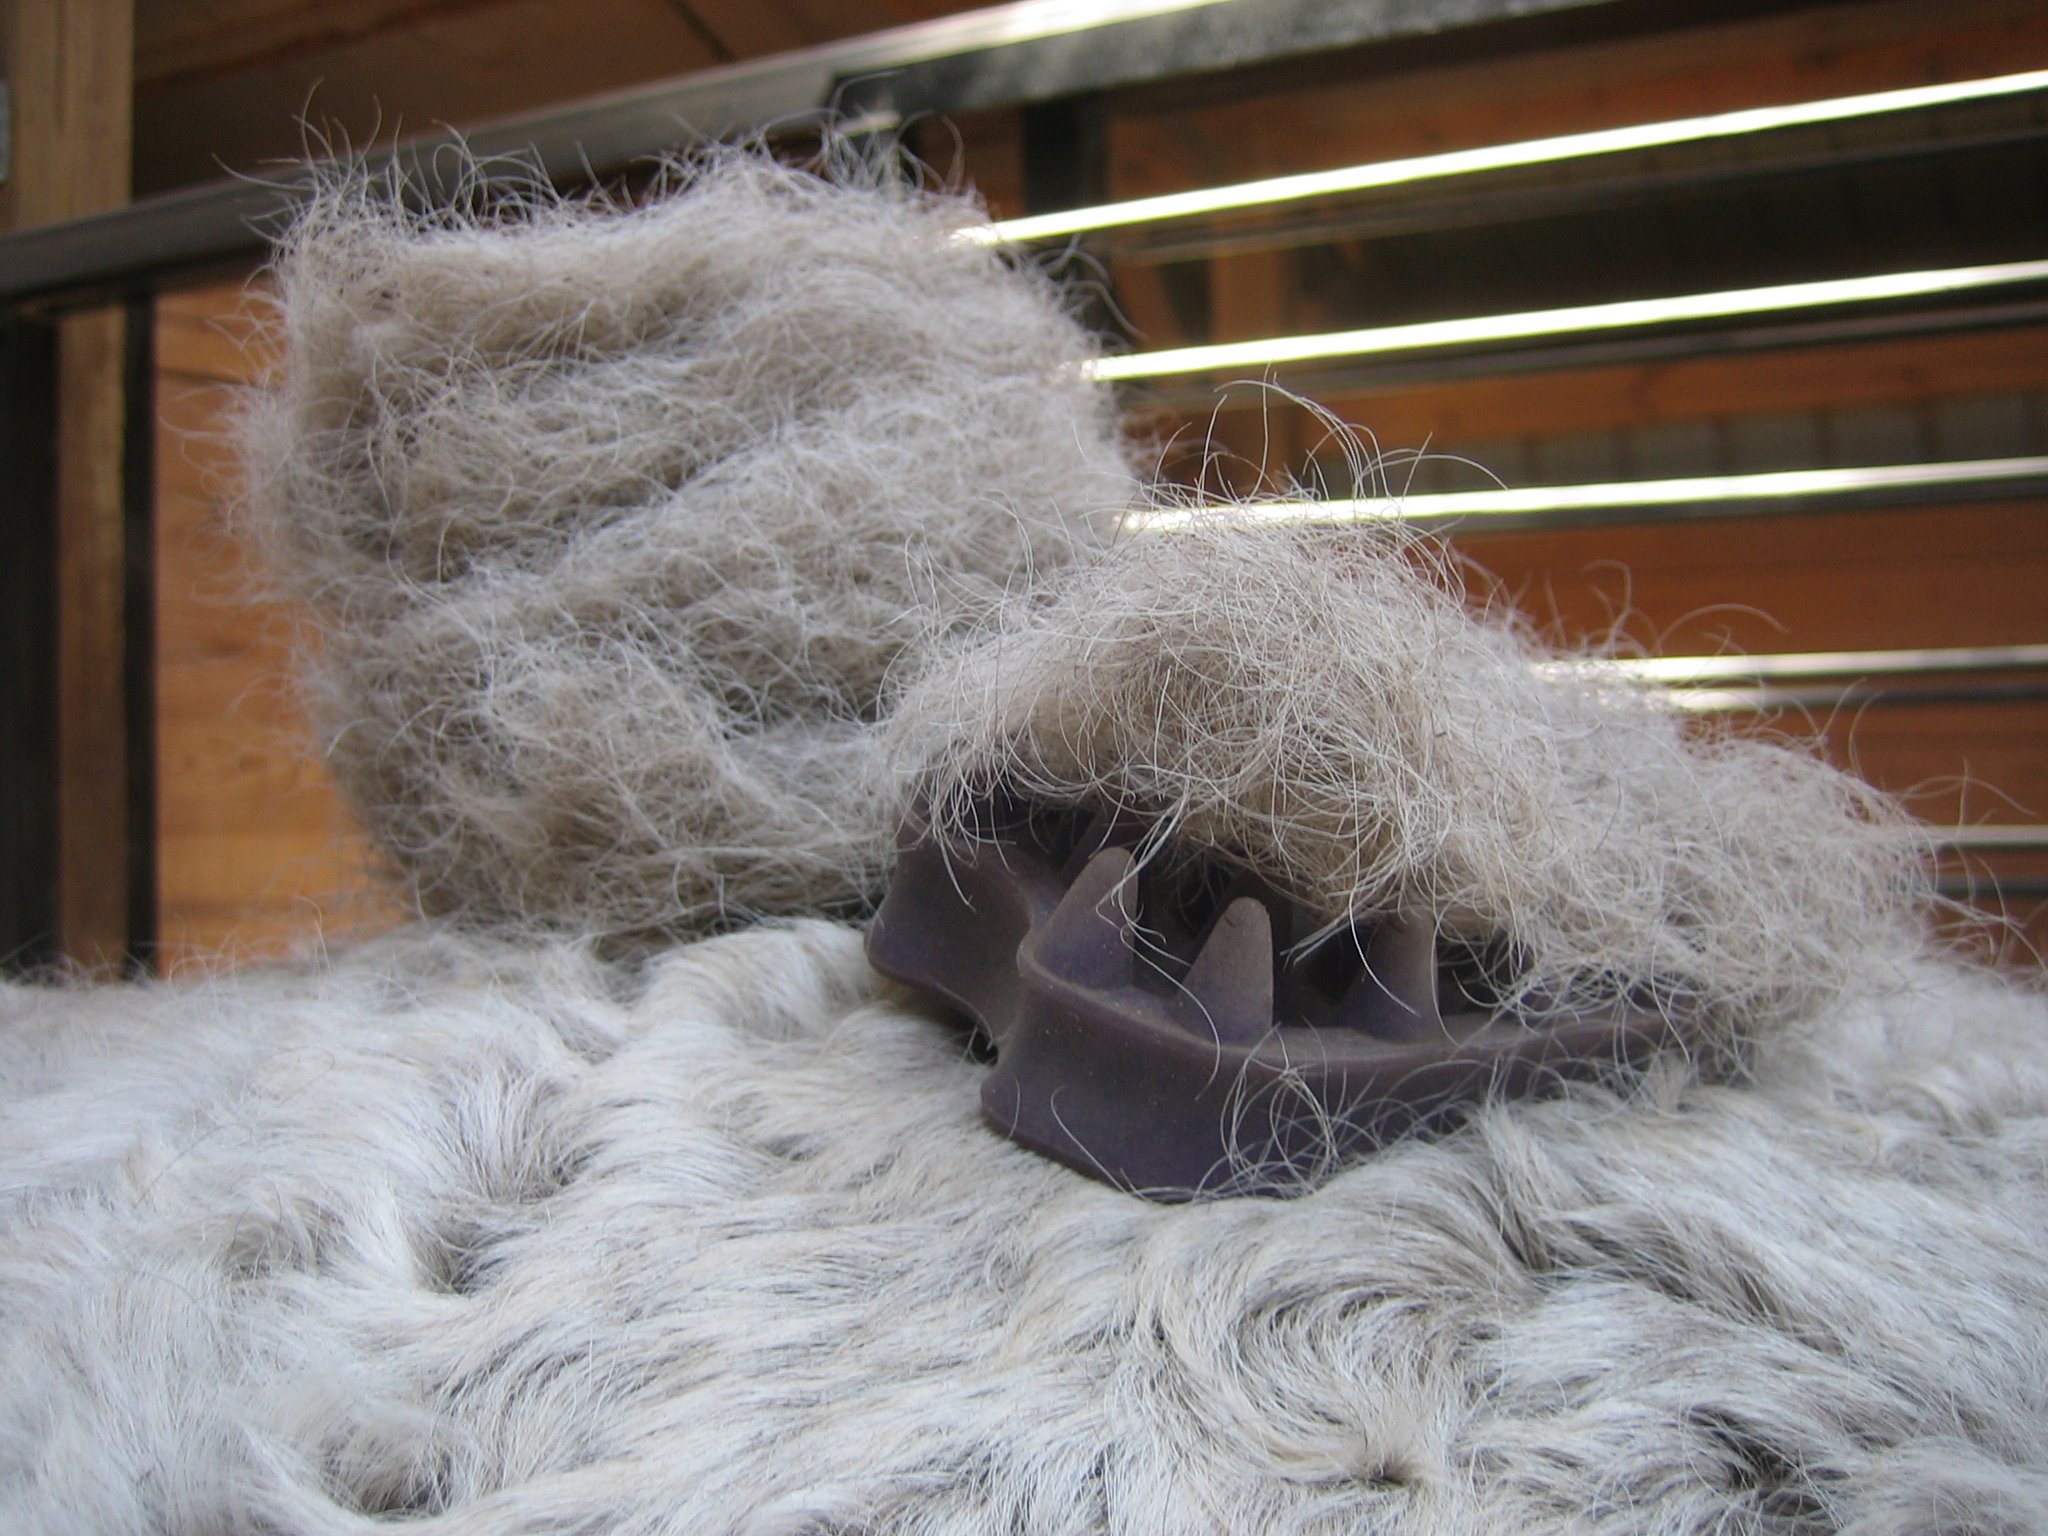 Horse hair caked on a curry grooming tool during shedding season.